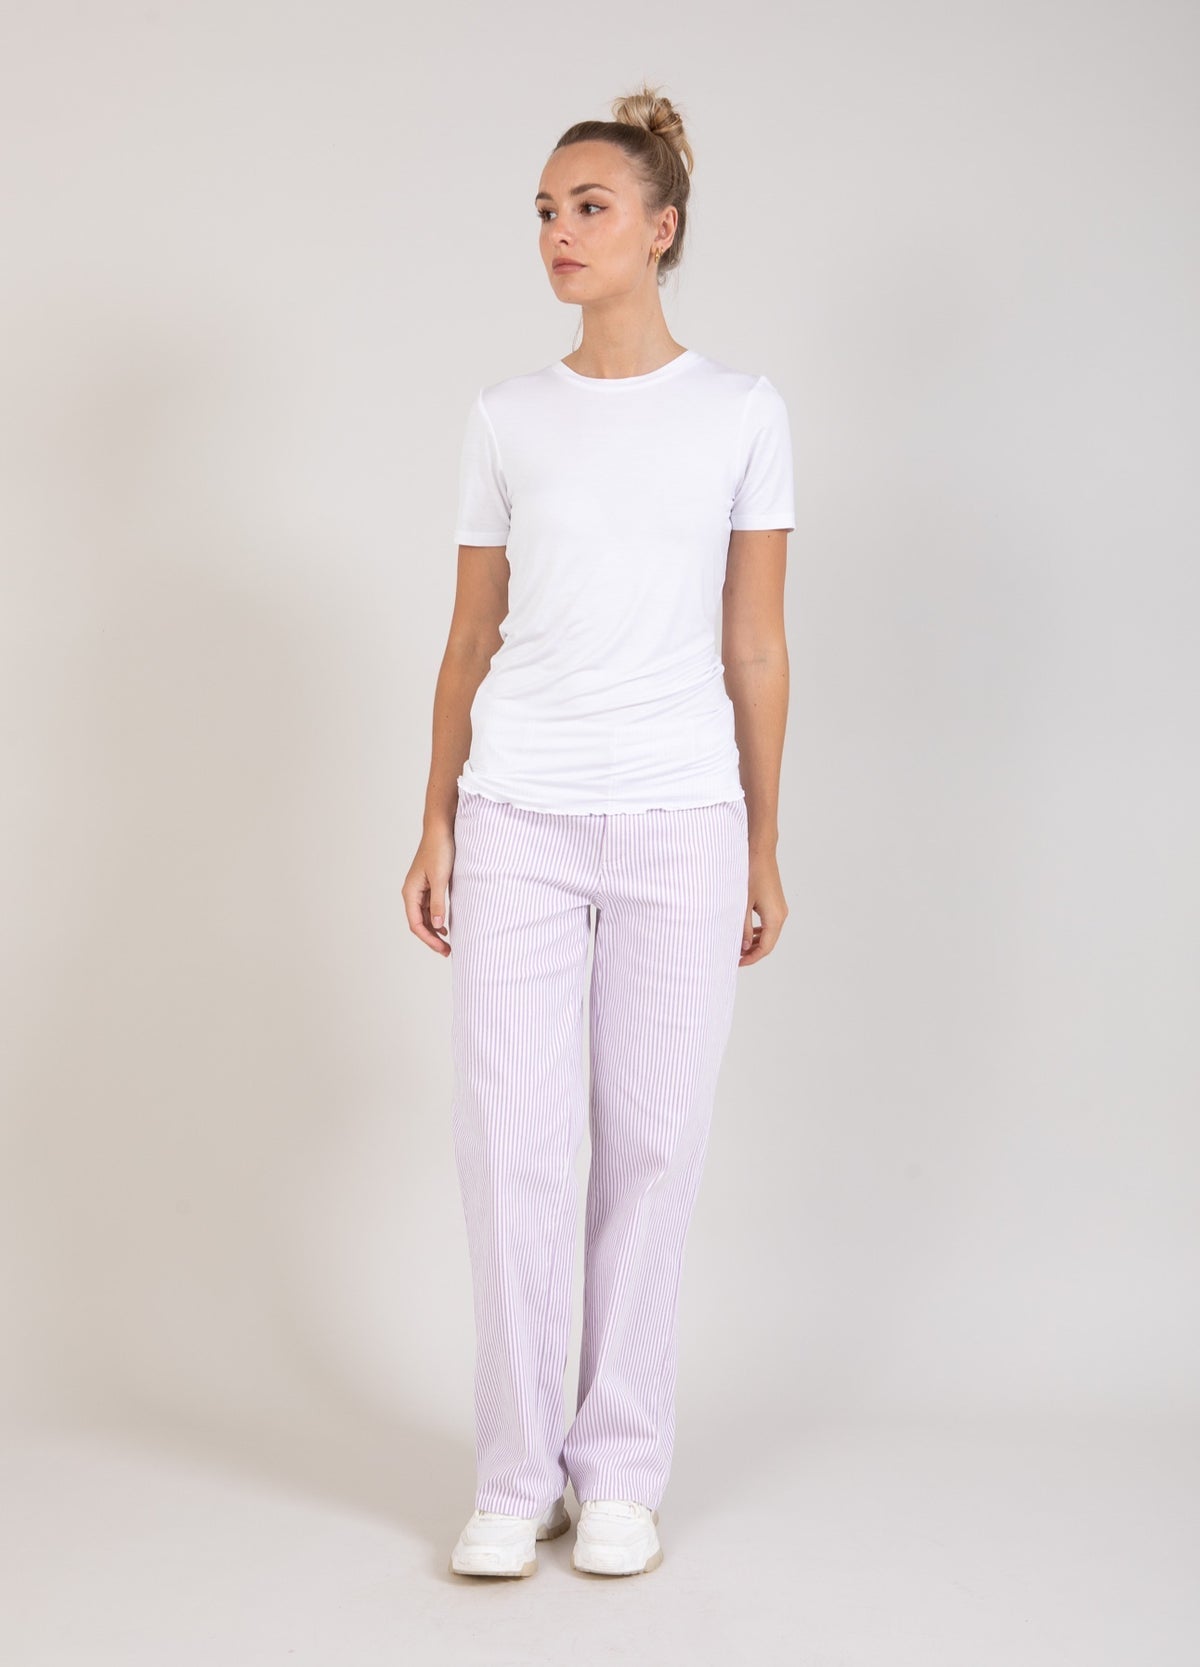 Matilde Off White and Purple Striped Trousers